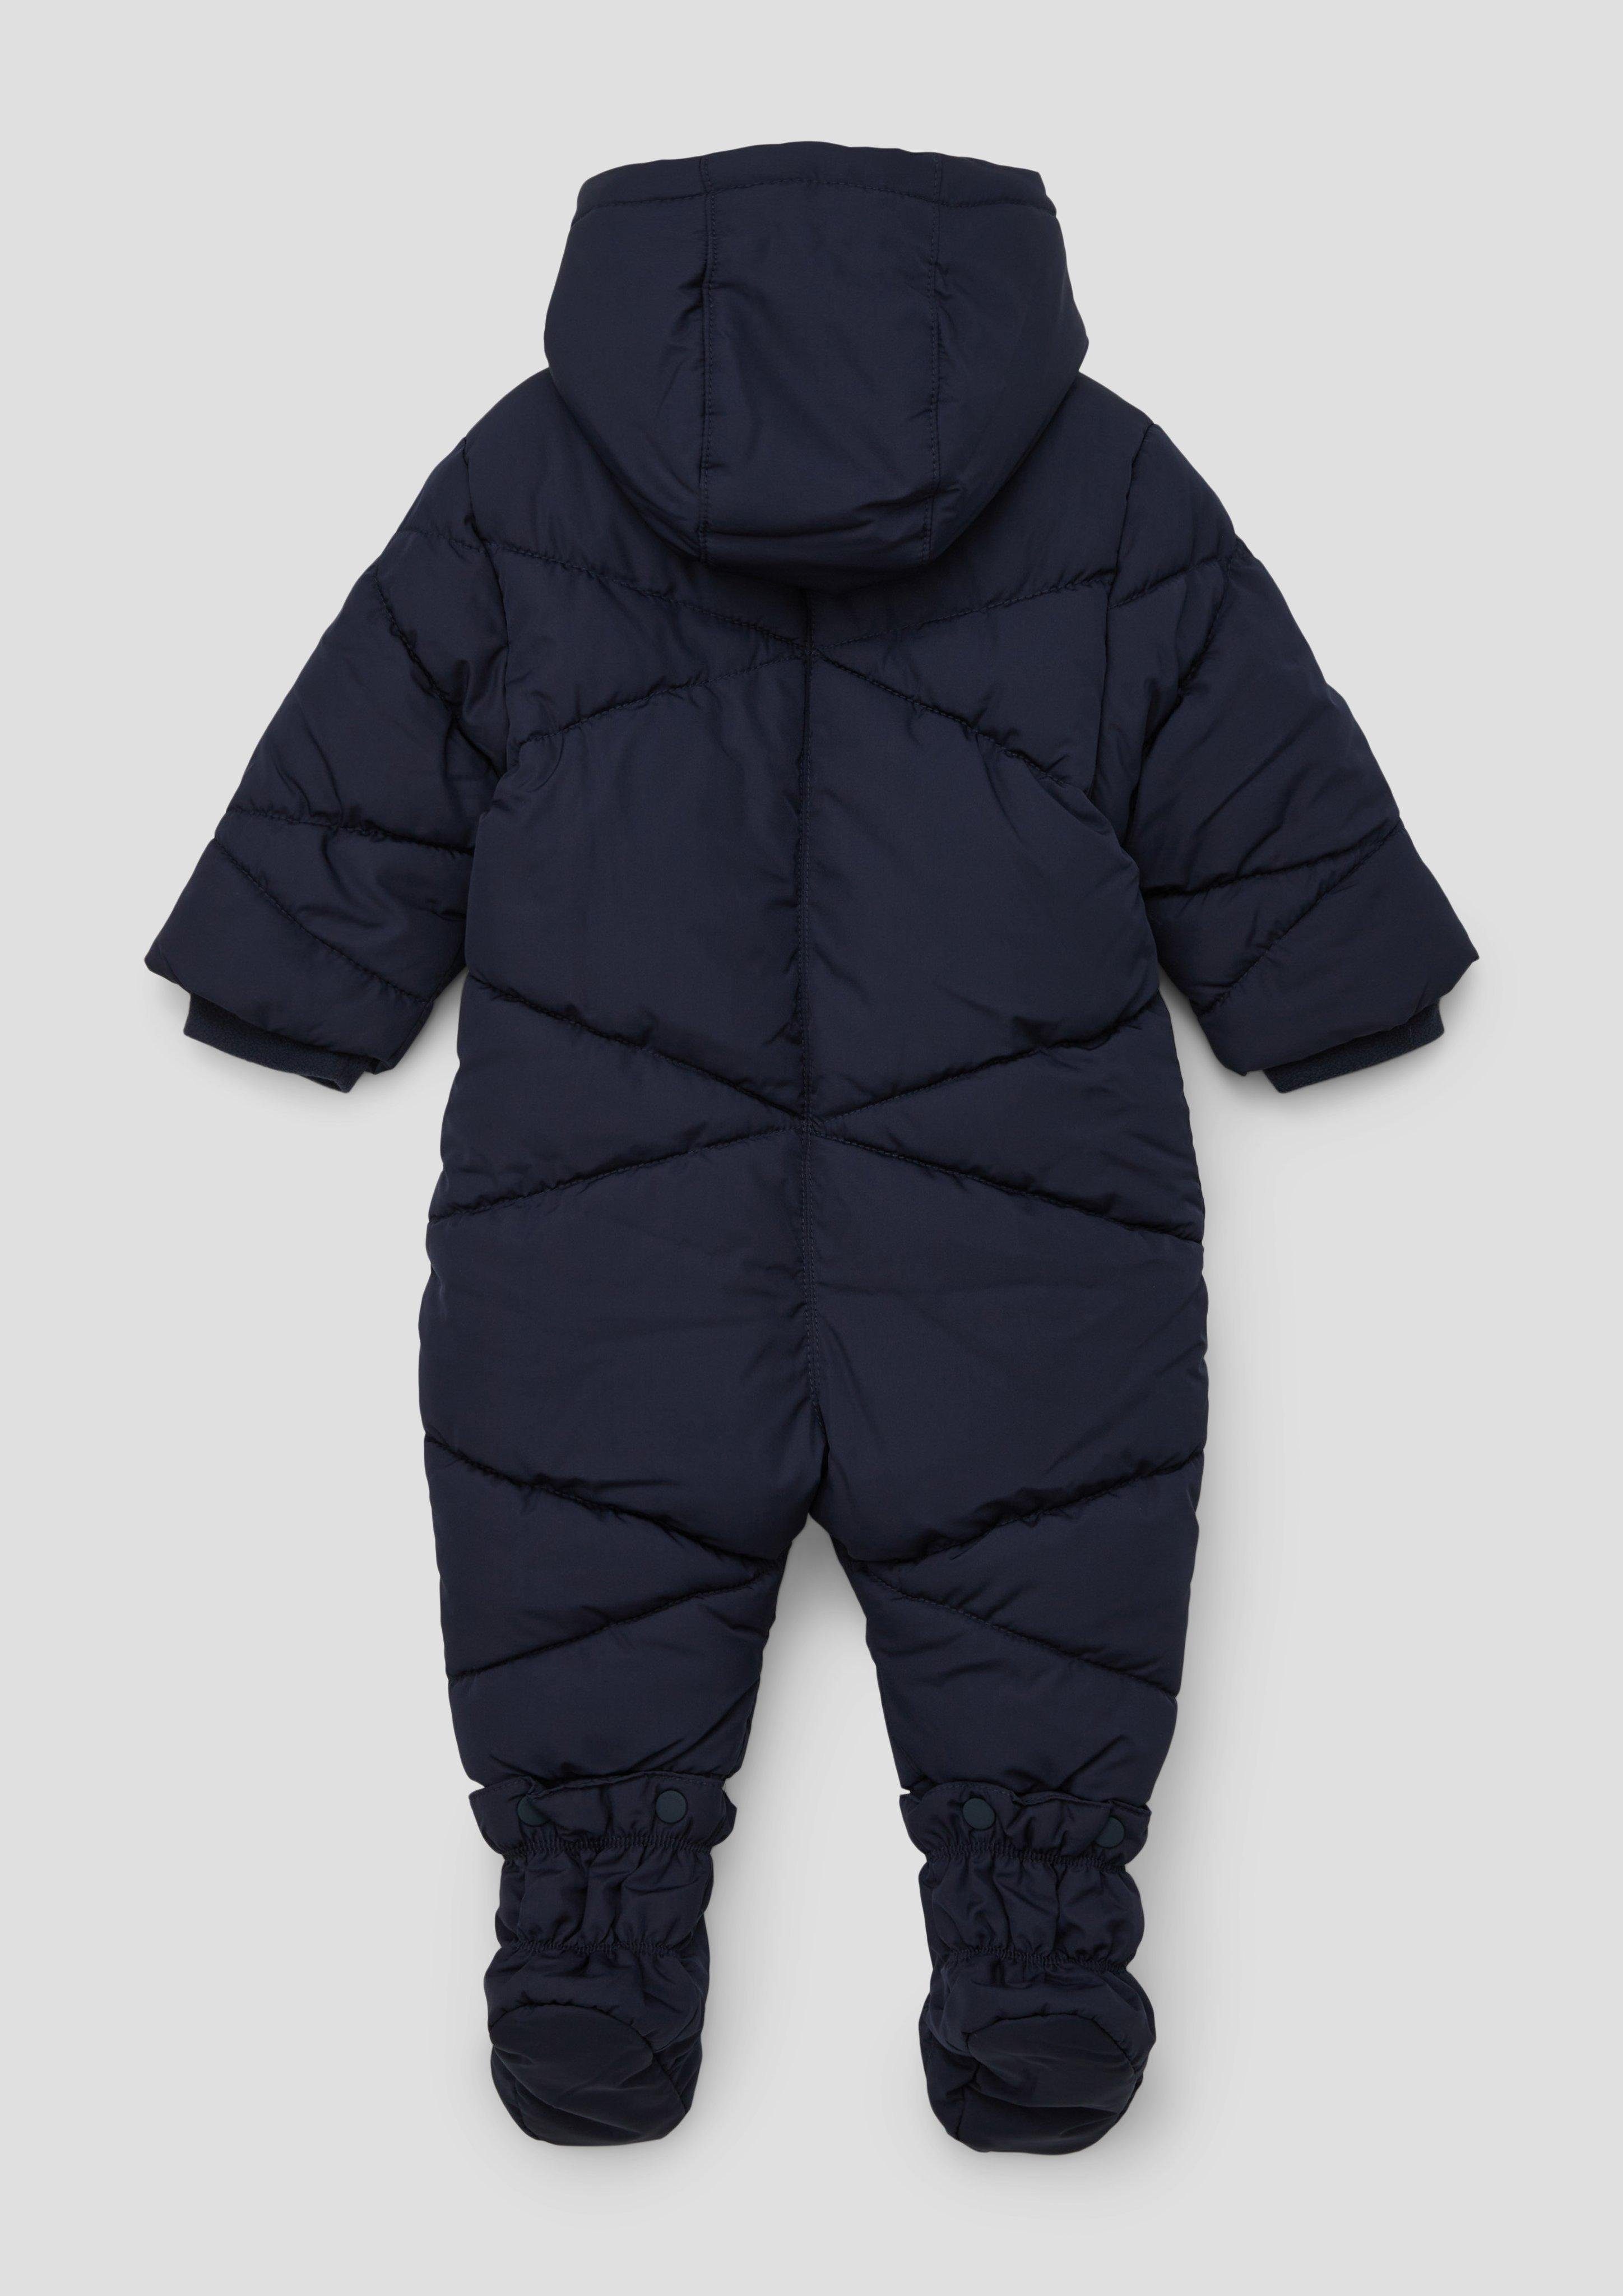 Schuhen mit abnehmbaren Overall Baby-Overall s.Oliver